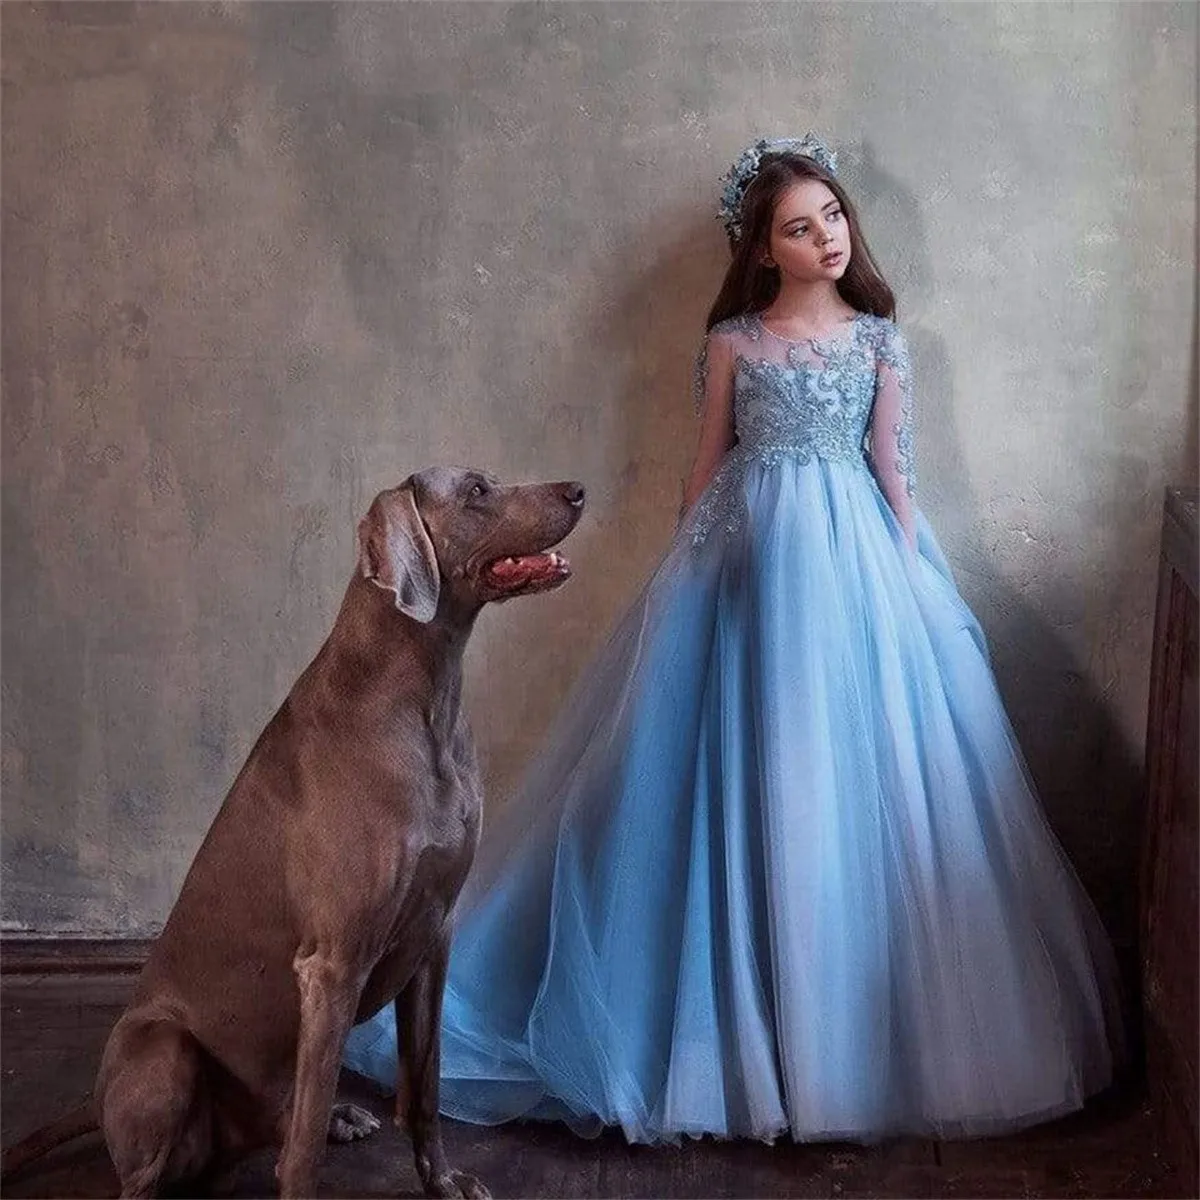 

Elegant Blue Long Sleeves Flower Girls Dresses For Wedding Princess Illusion Tulle Appliques Pageant First Communion Gowns